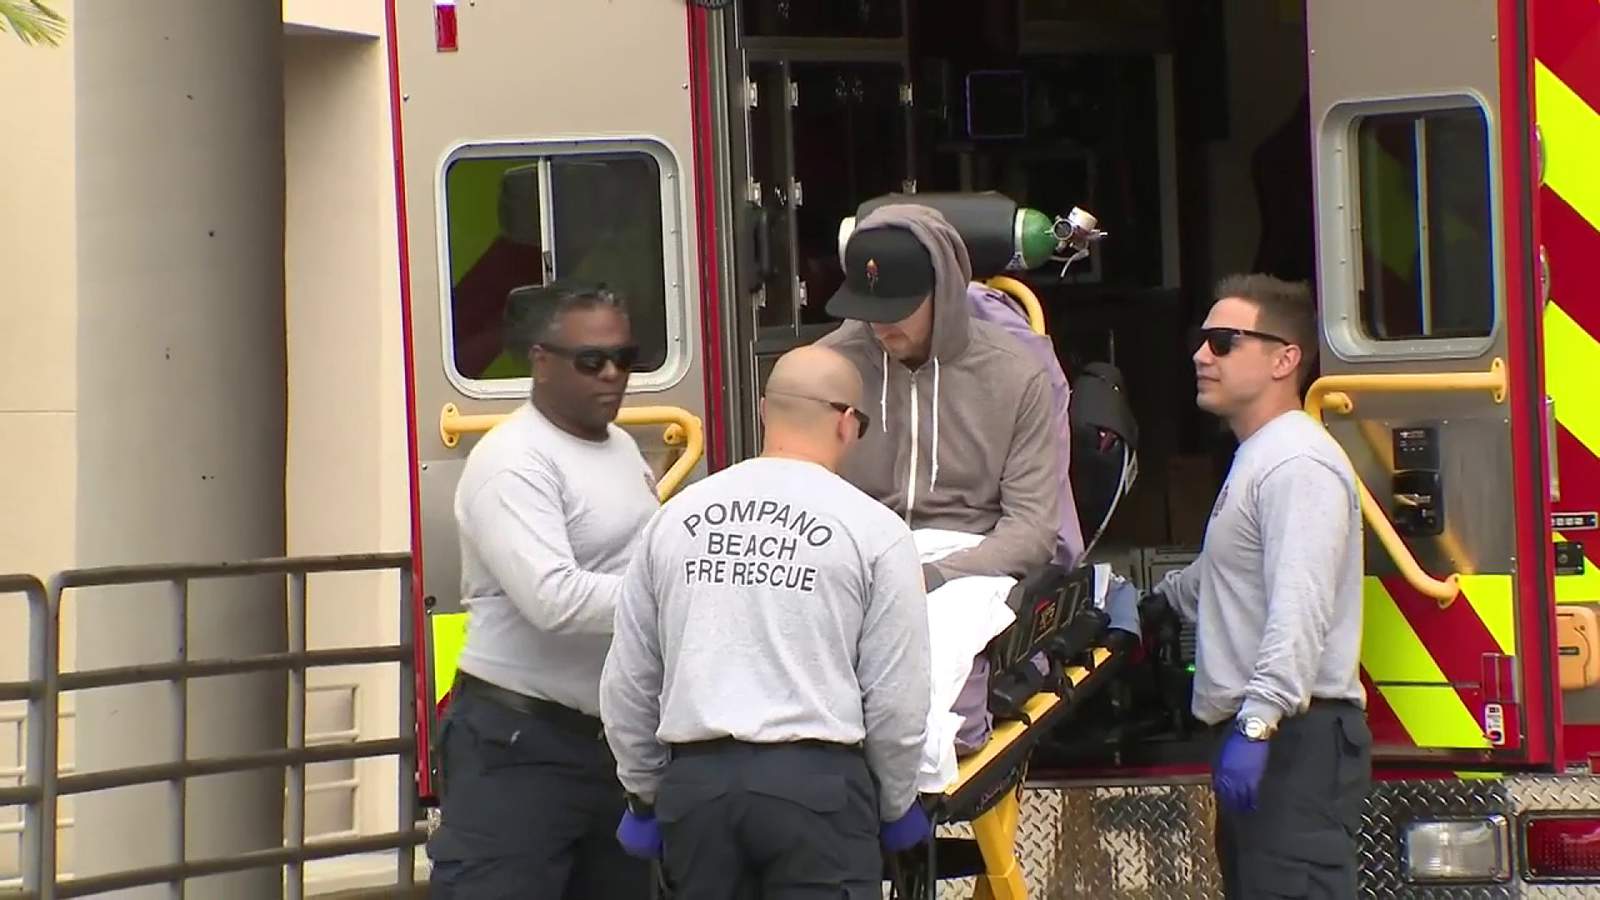 After 30-foot fall in Bali, firefighter recovers at Memorial Regional Hospital in Hollywood